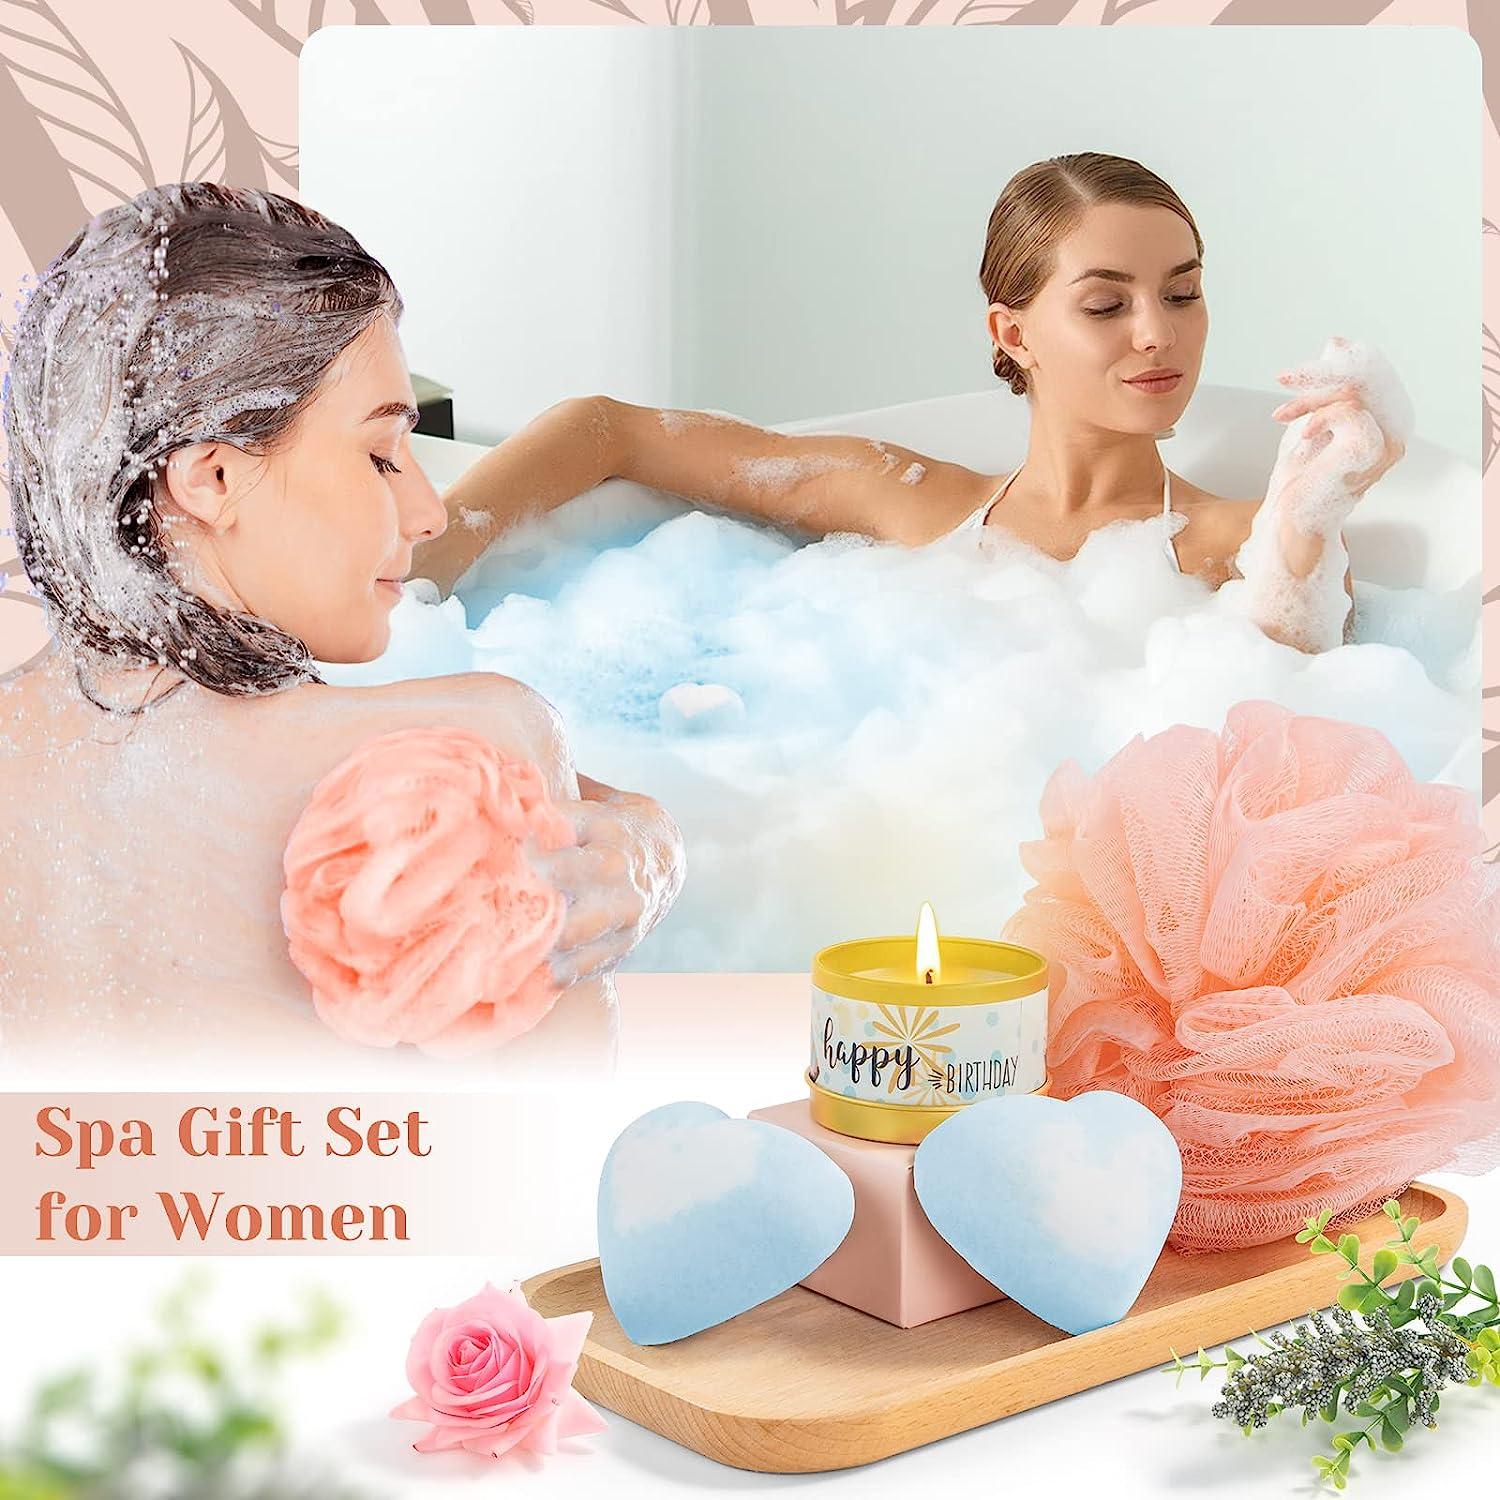 Birthday Gifts for Women, Relaxing Spa Gift Box Basket for Her, Pampering  Gifts Thank You Gifts for Girls, Mom Wife Sister Best Friend Unique Happy